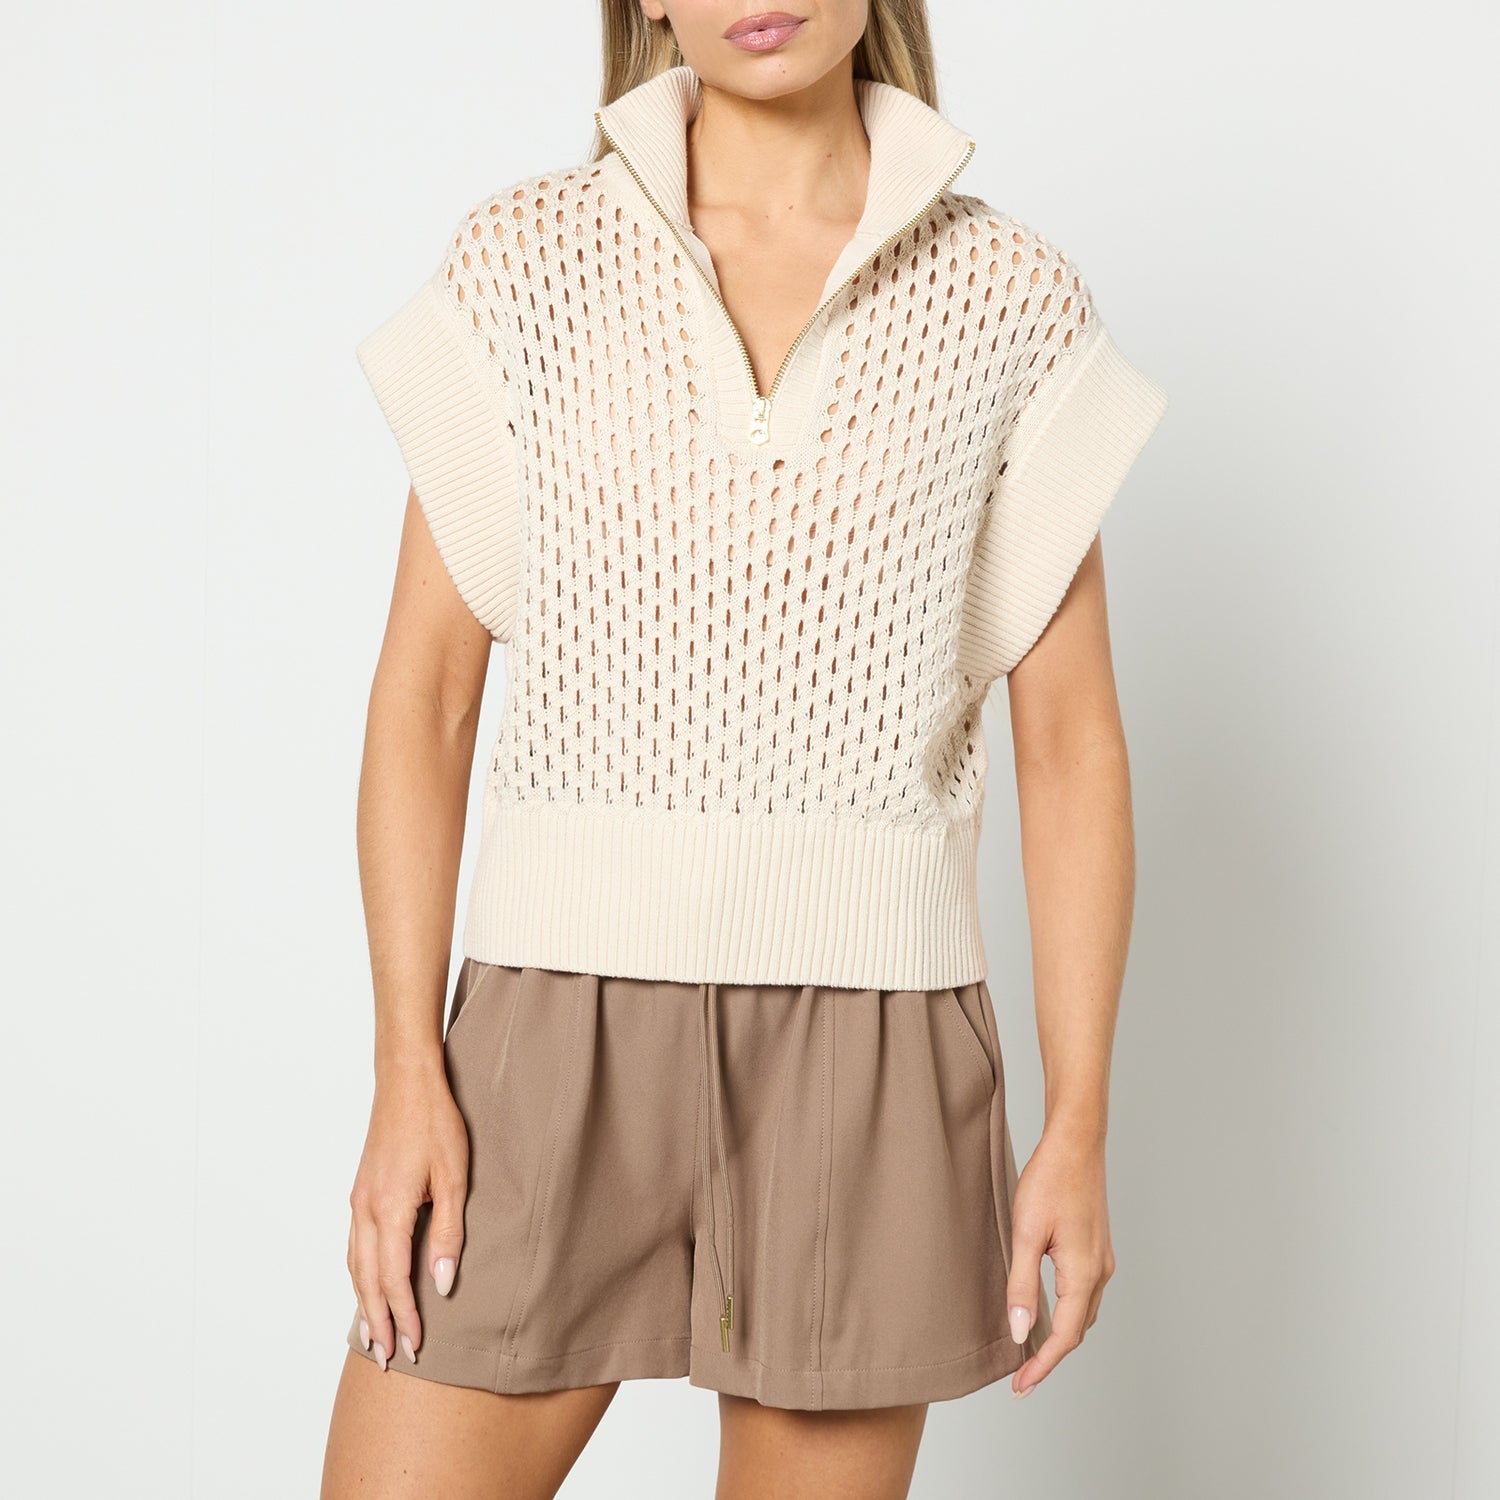 Varley Gaines Cotton Open-Knit Top - XS